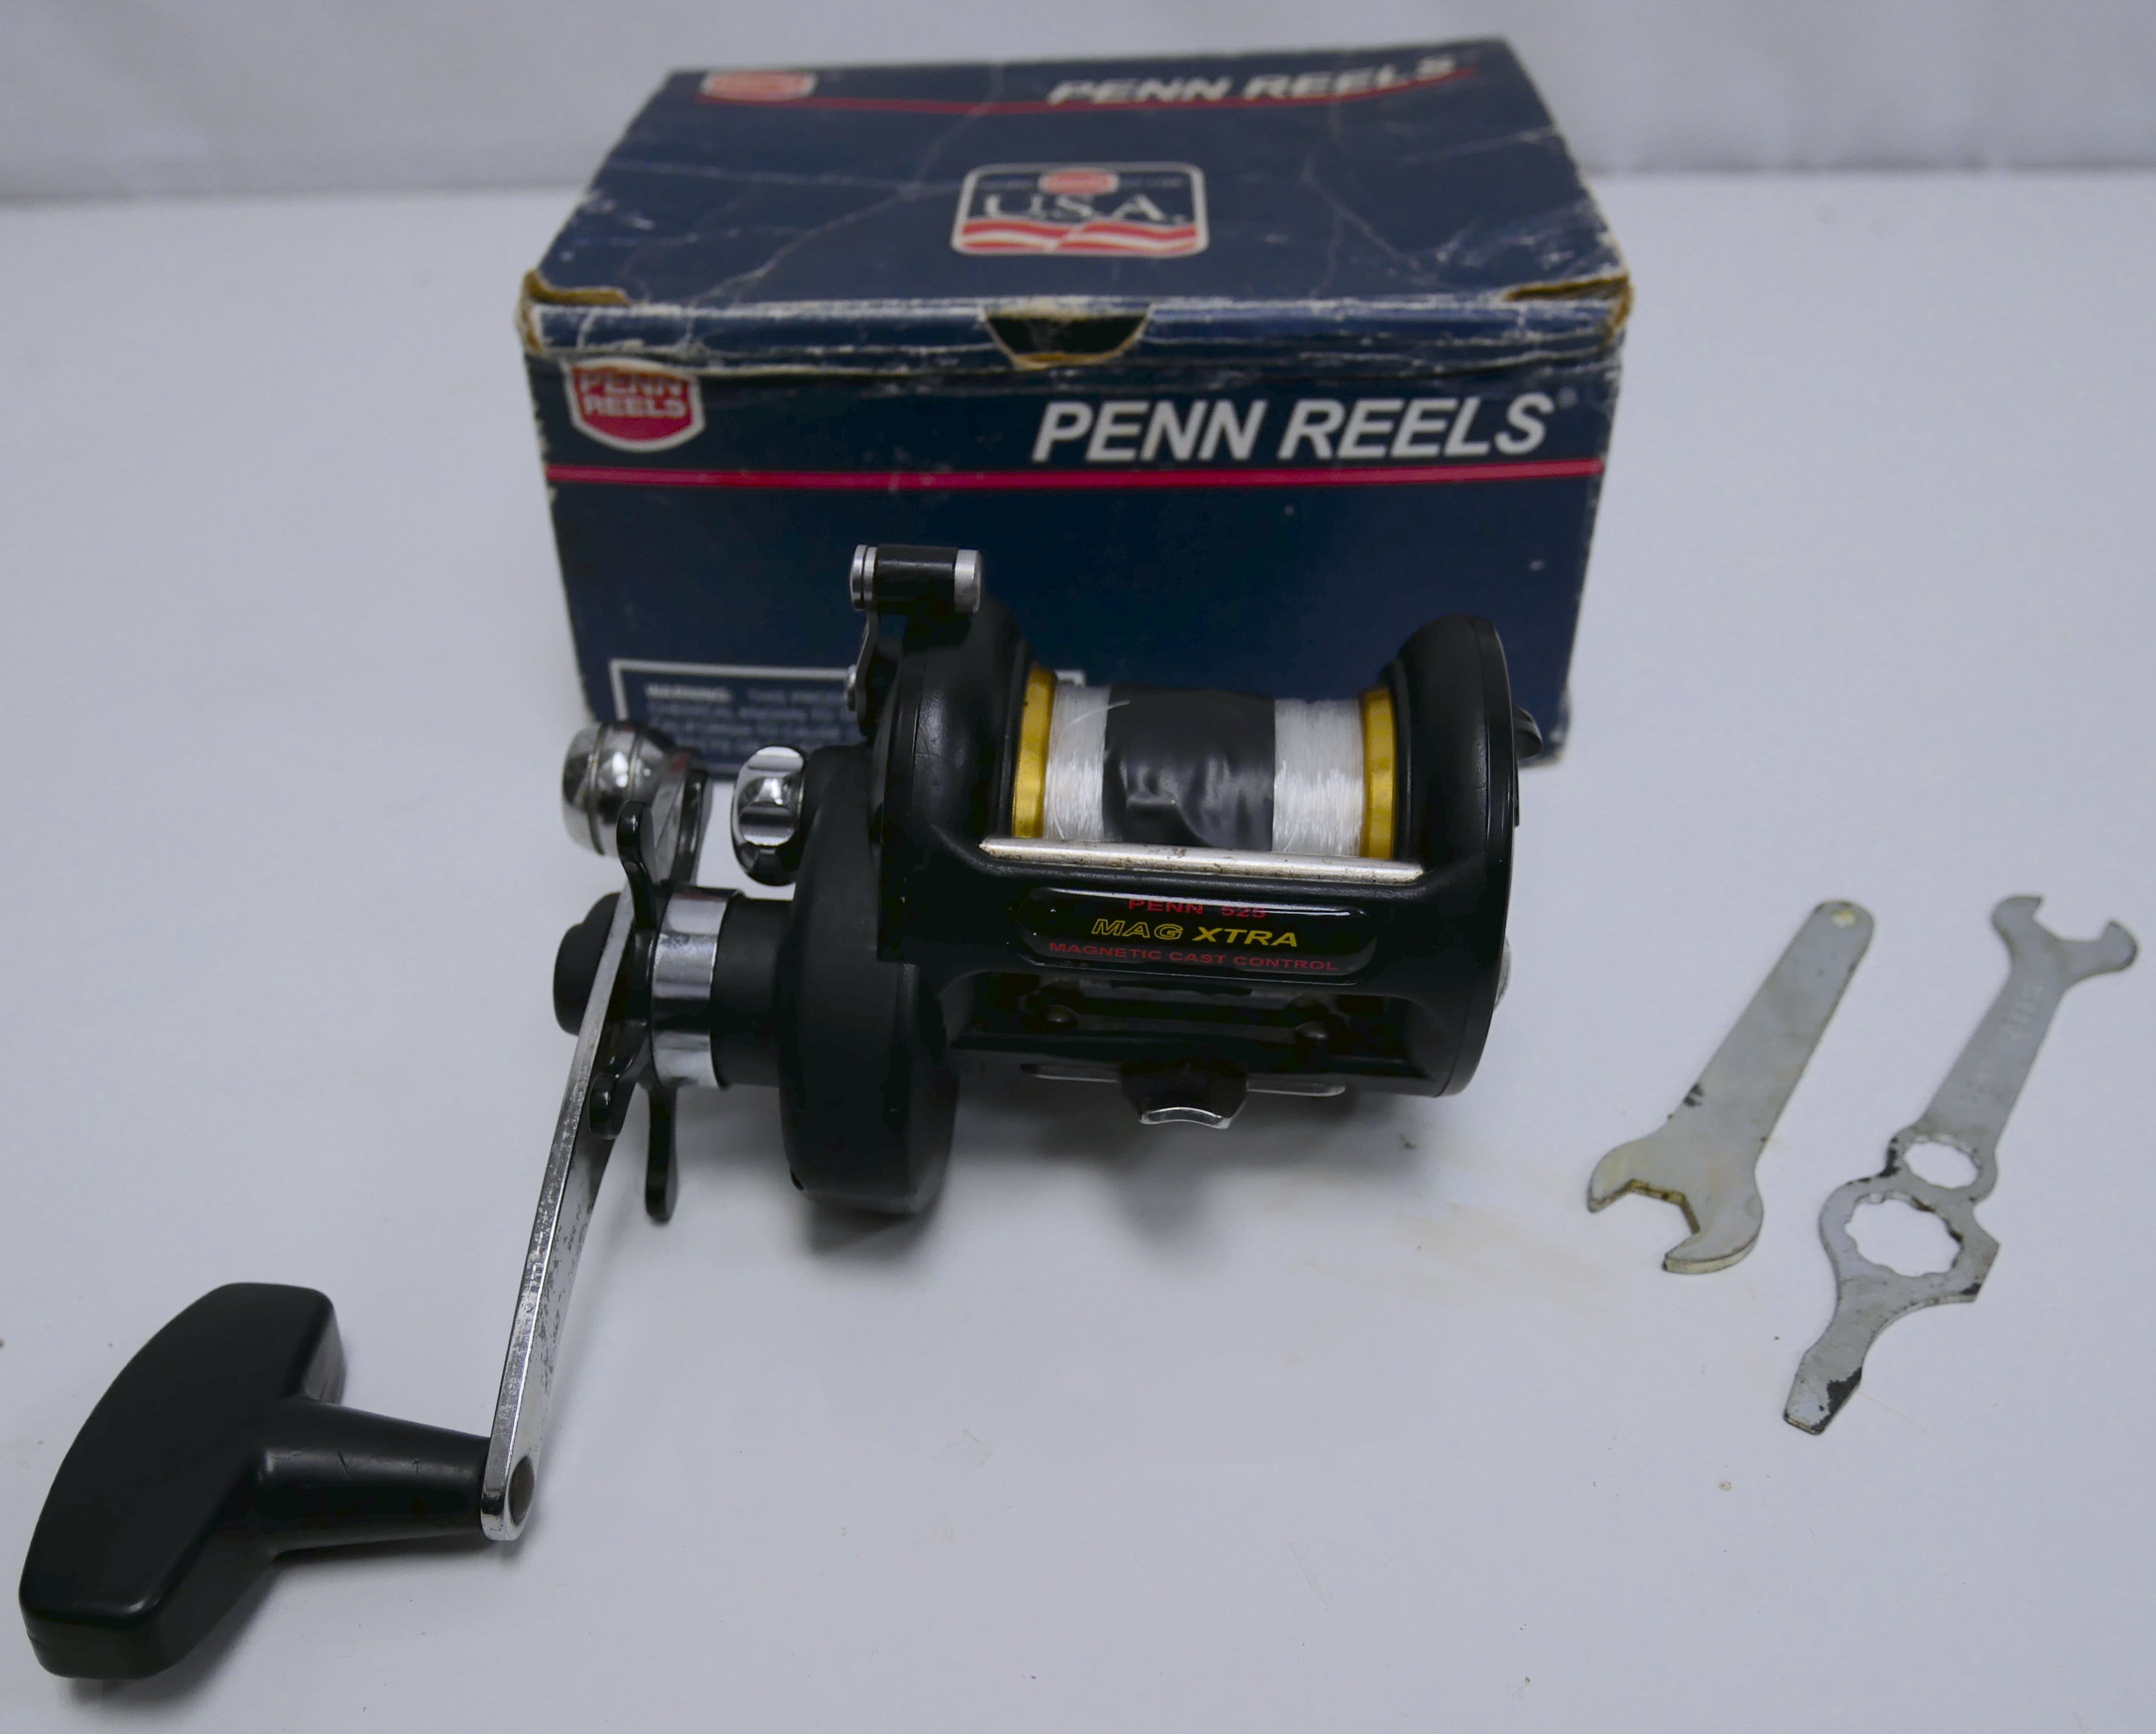 Penn 525 MAG XTRA Multiplier Reel – Fish For Tackle